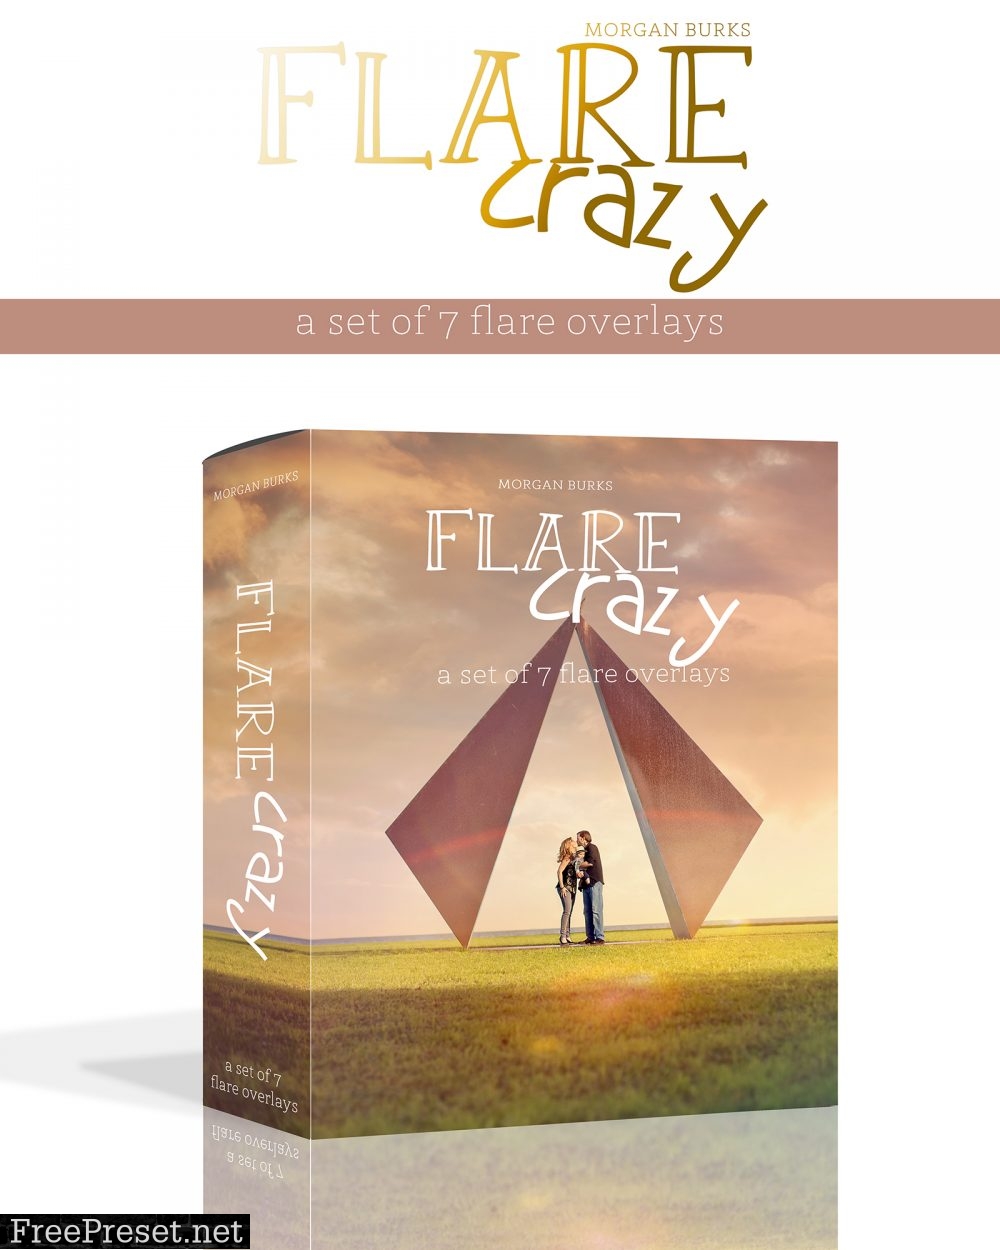 MB Flare Crazy Overlays